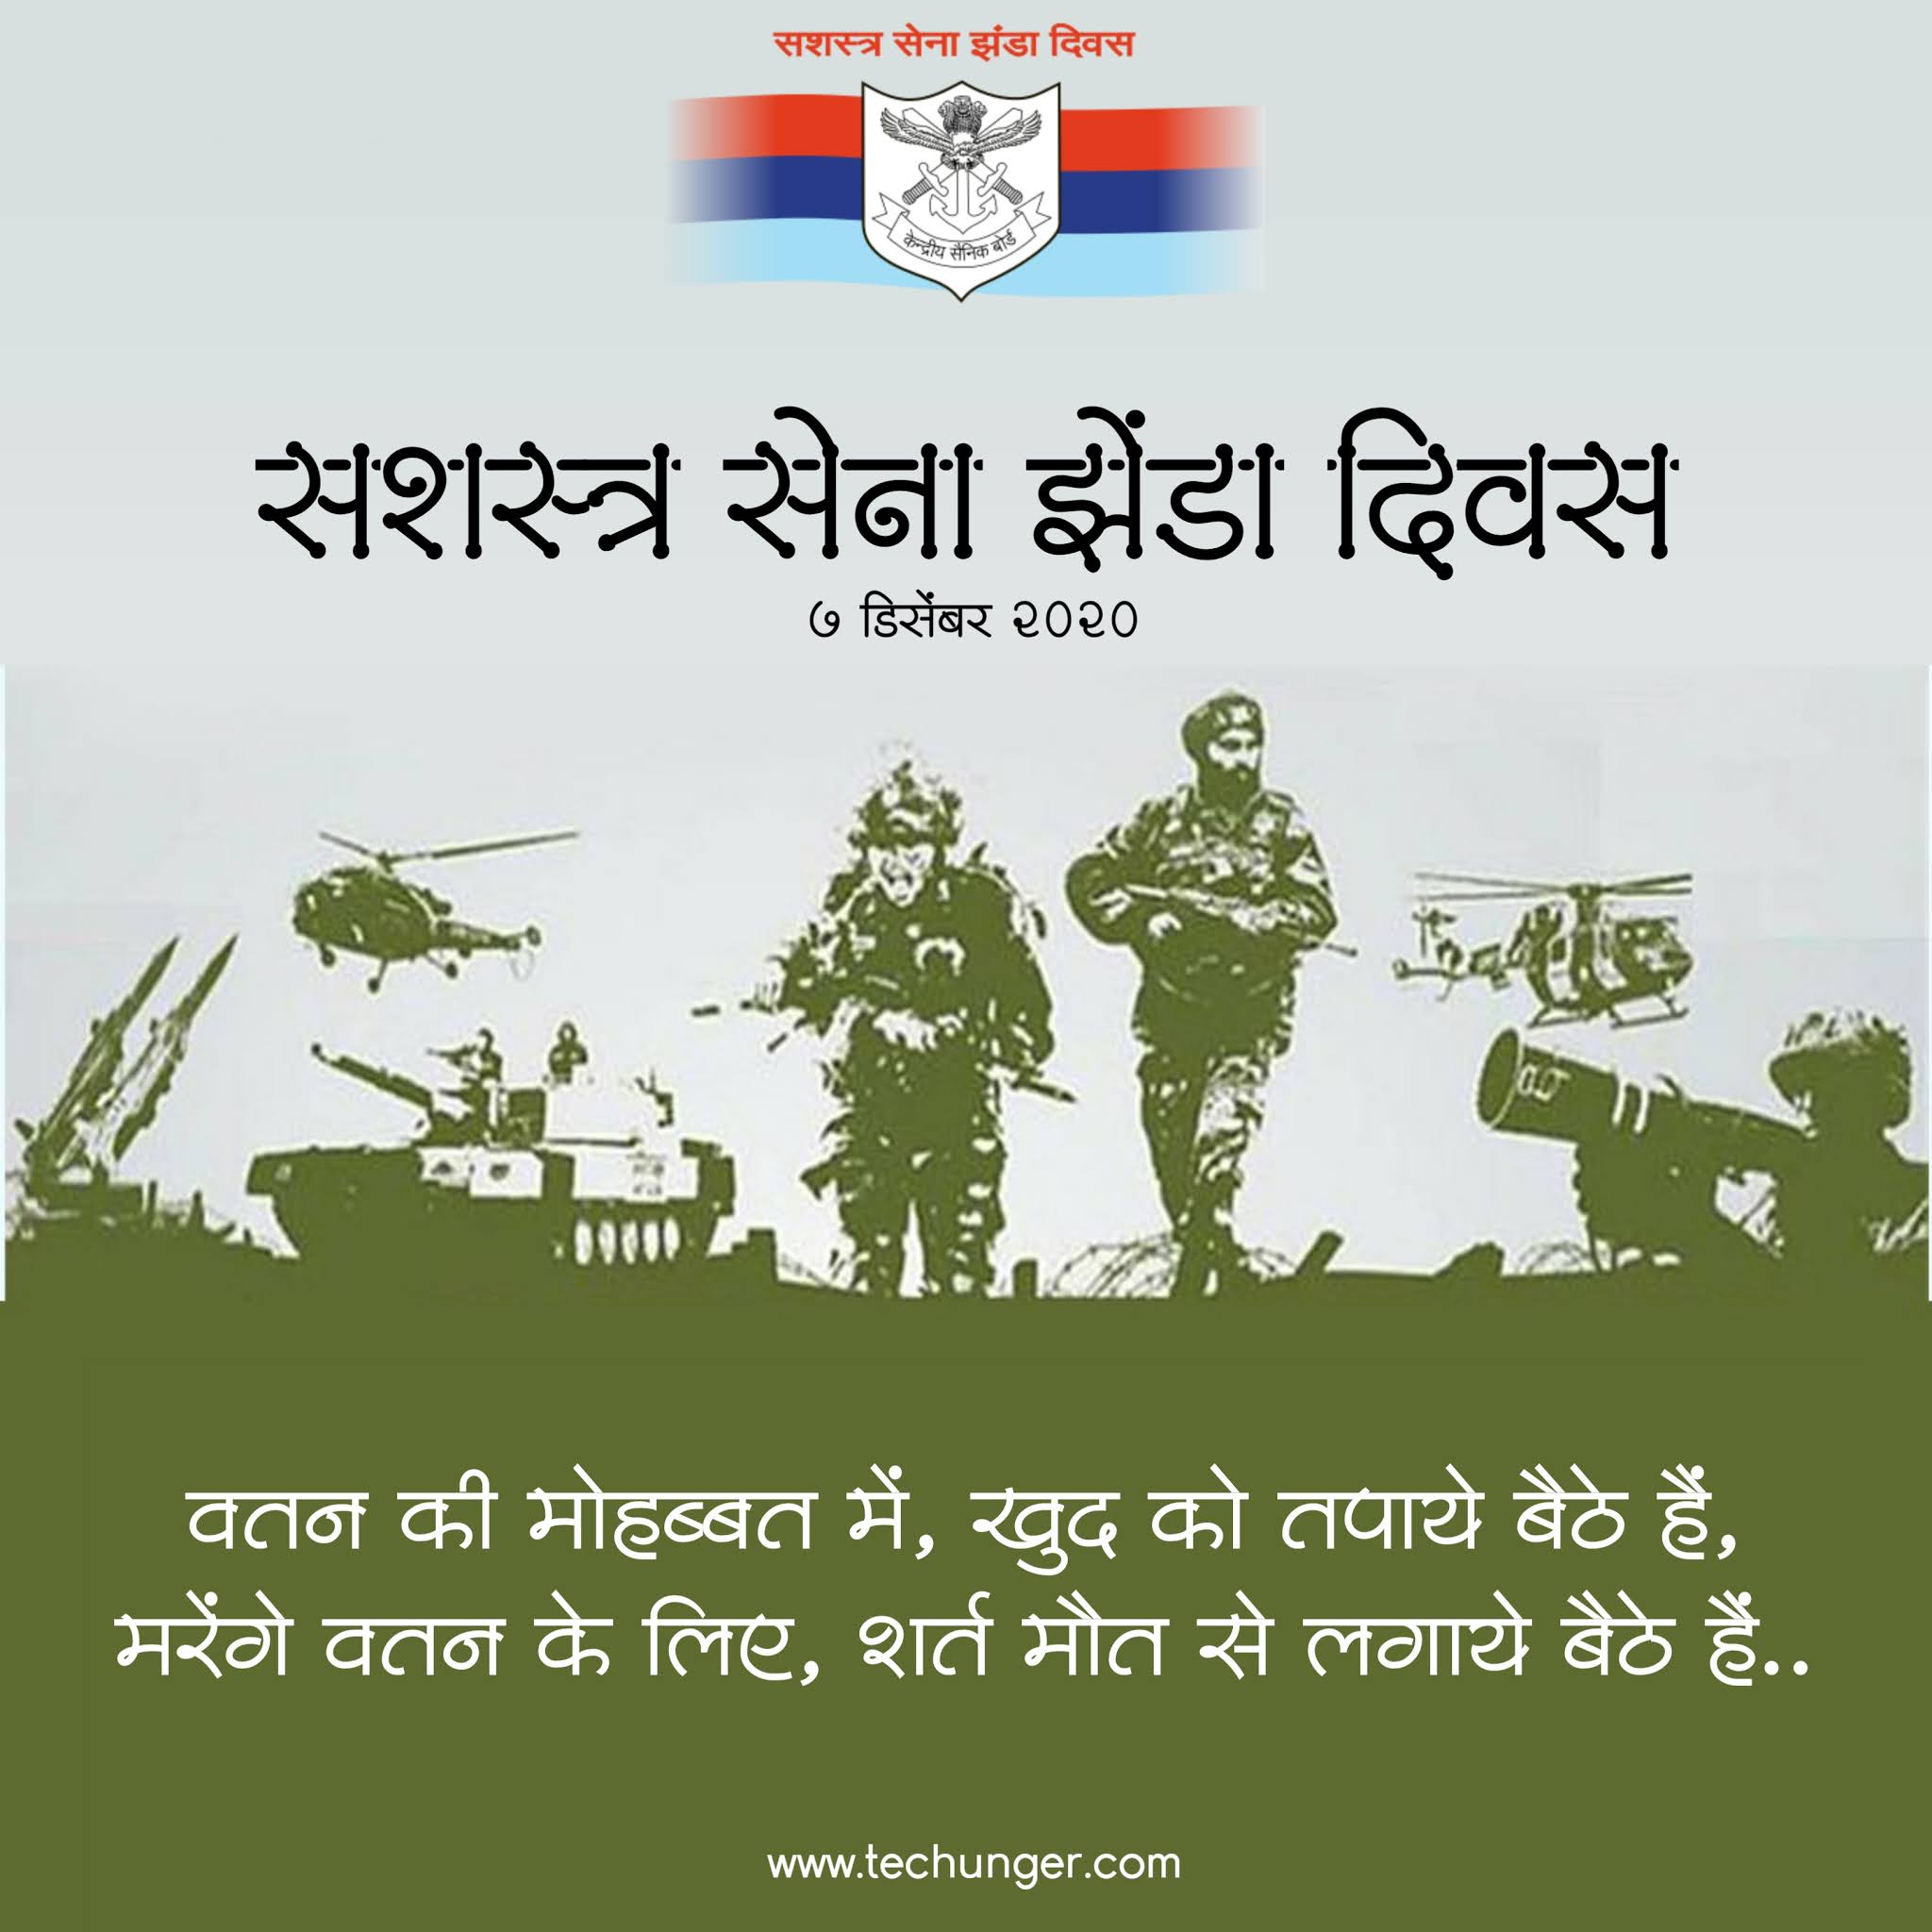 Armed forces day, national day, 7 December 2020, saurabh chaudhari